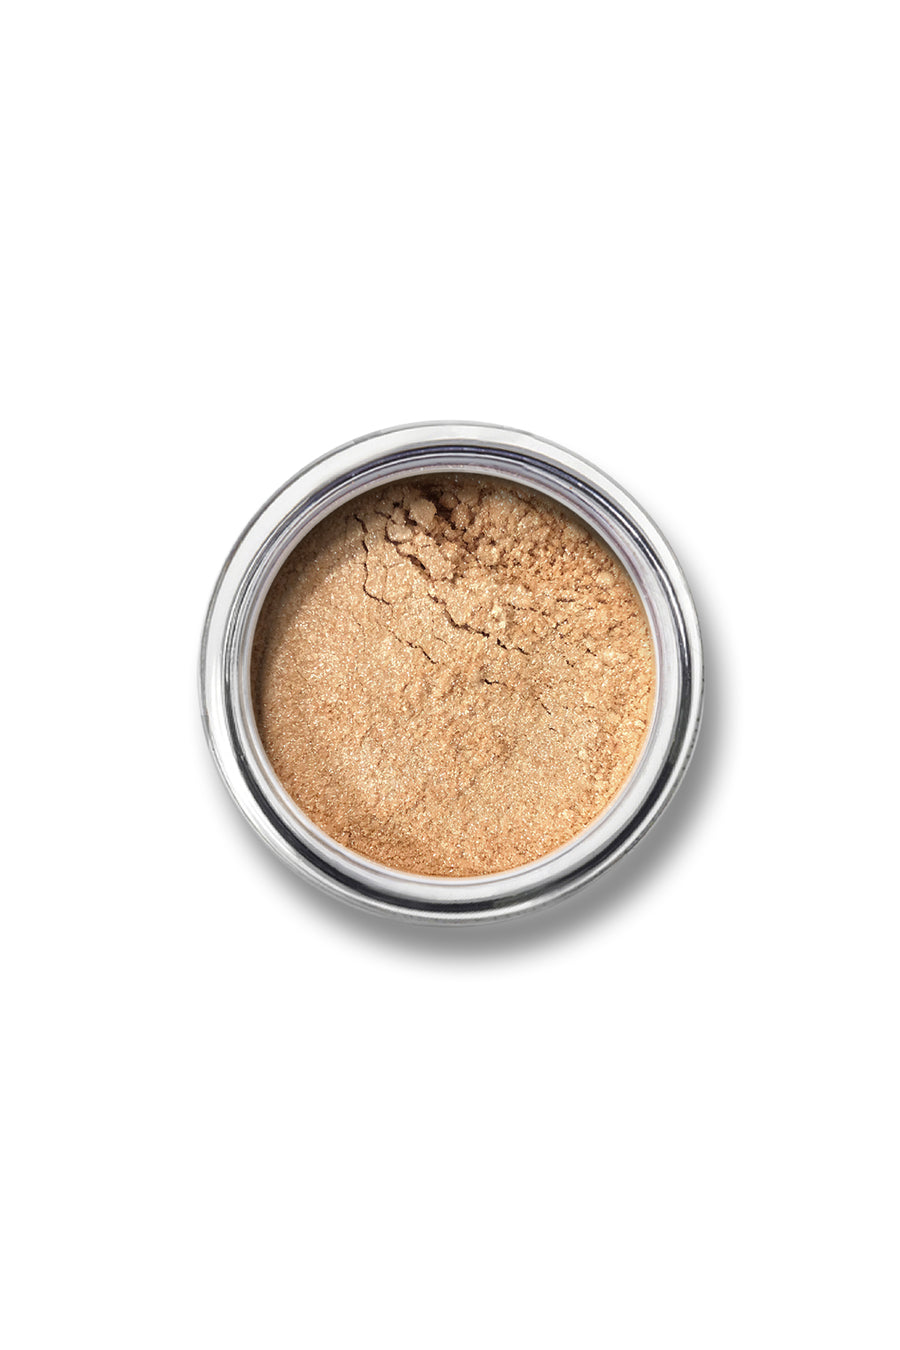 Shimmer Eyeshadow #29 - Champagne - Blend Mineral Cosmetics